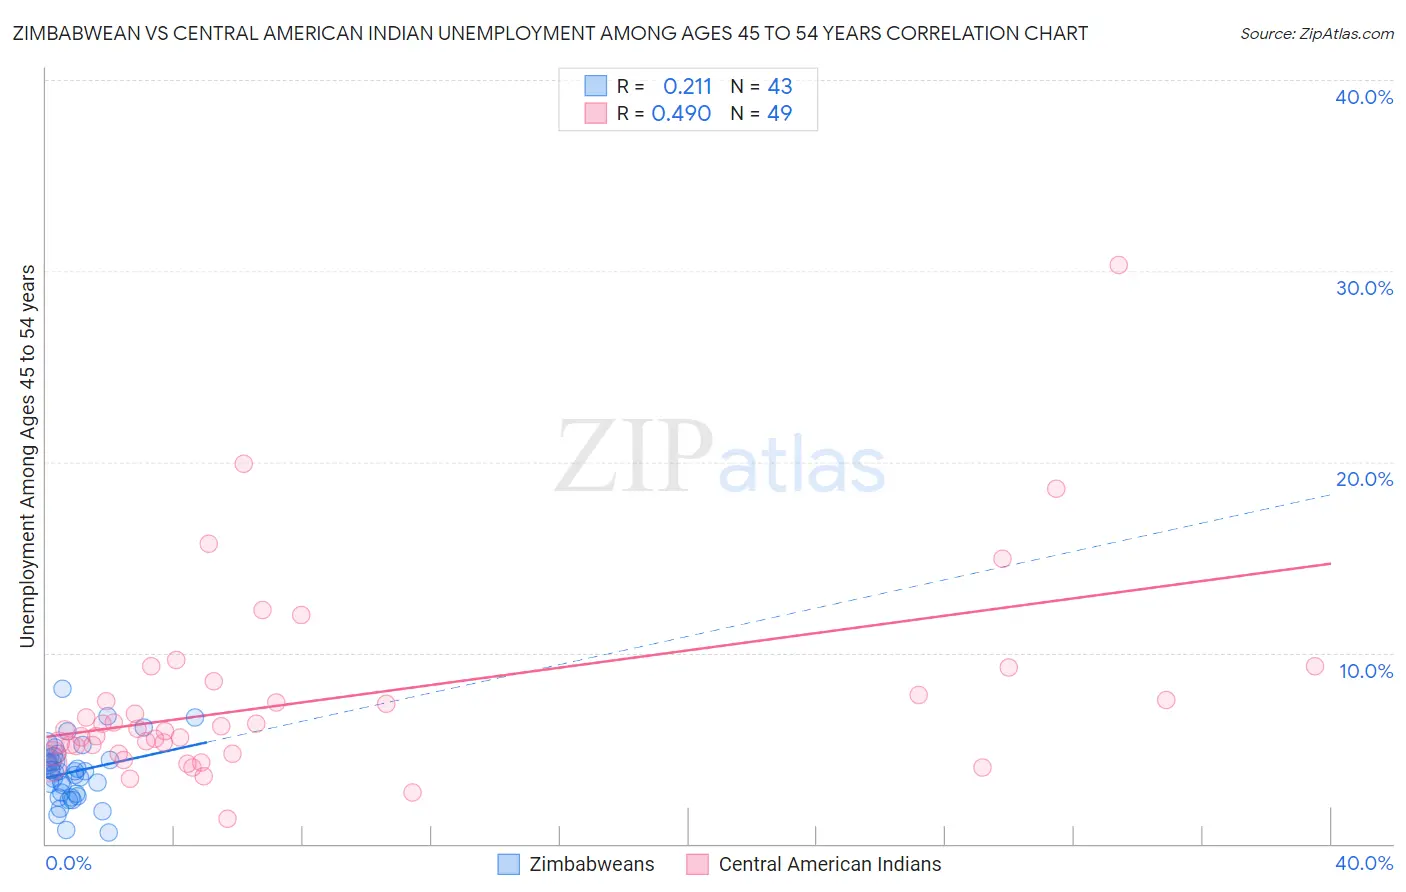 Zimbabwean vs Central American Indian Unemployment Among Ages 45 to 54 years